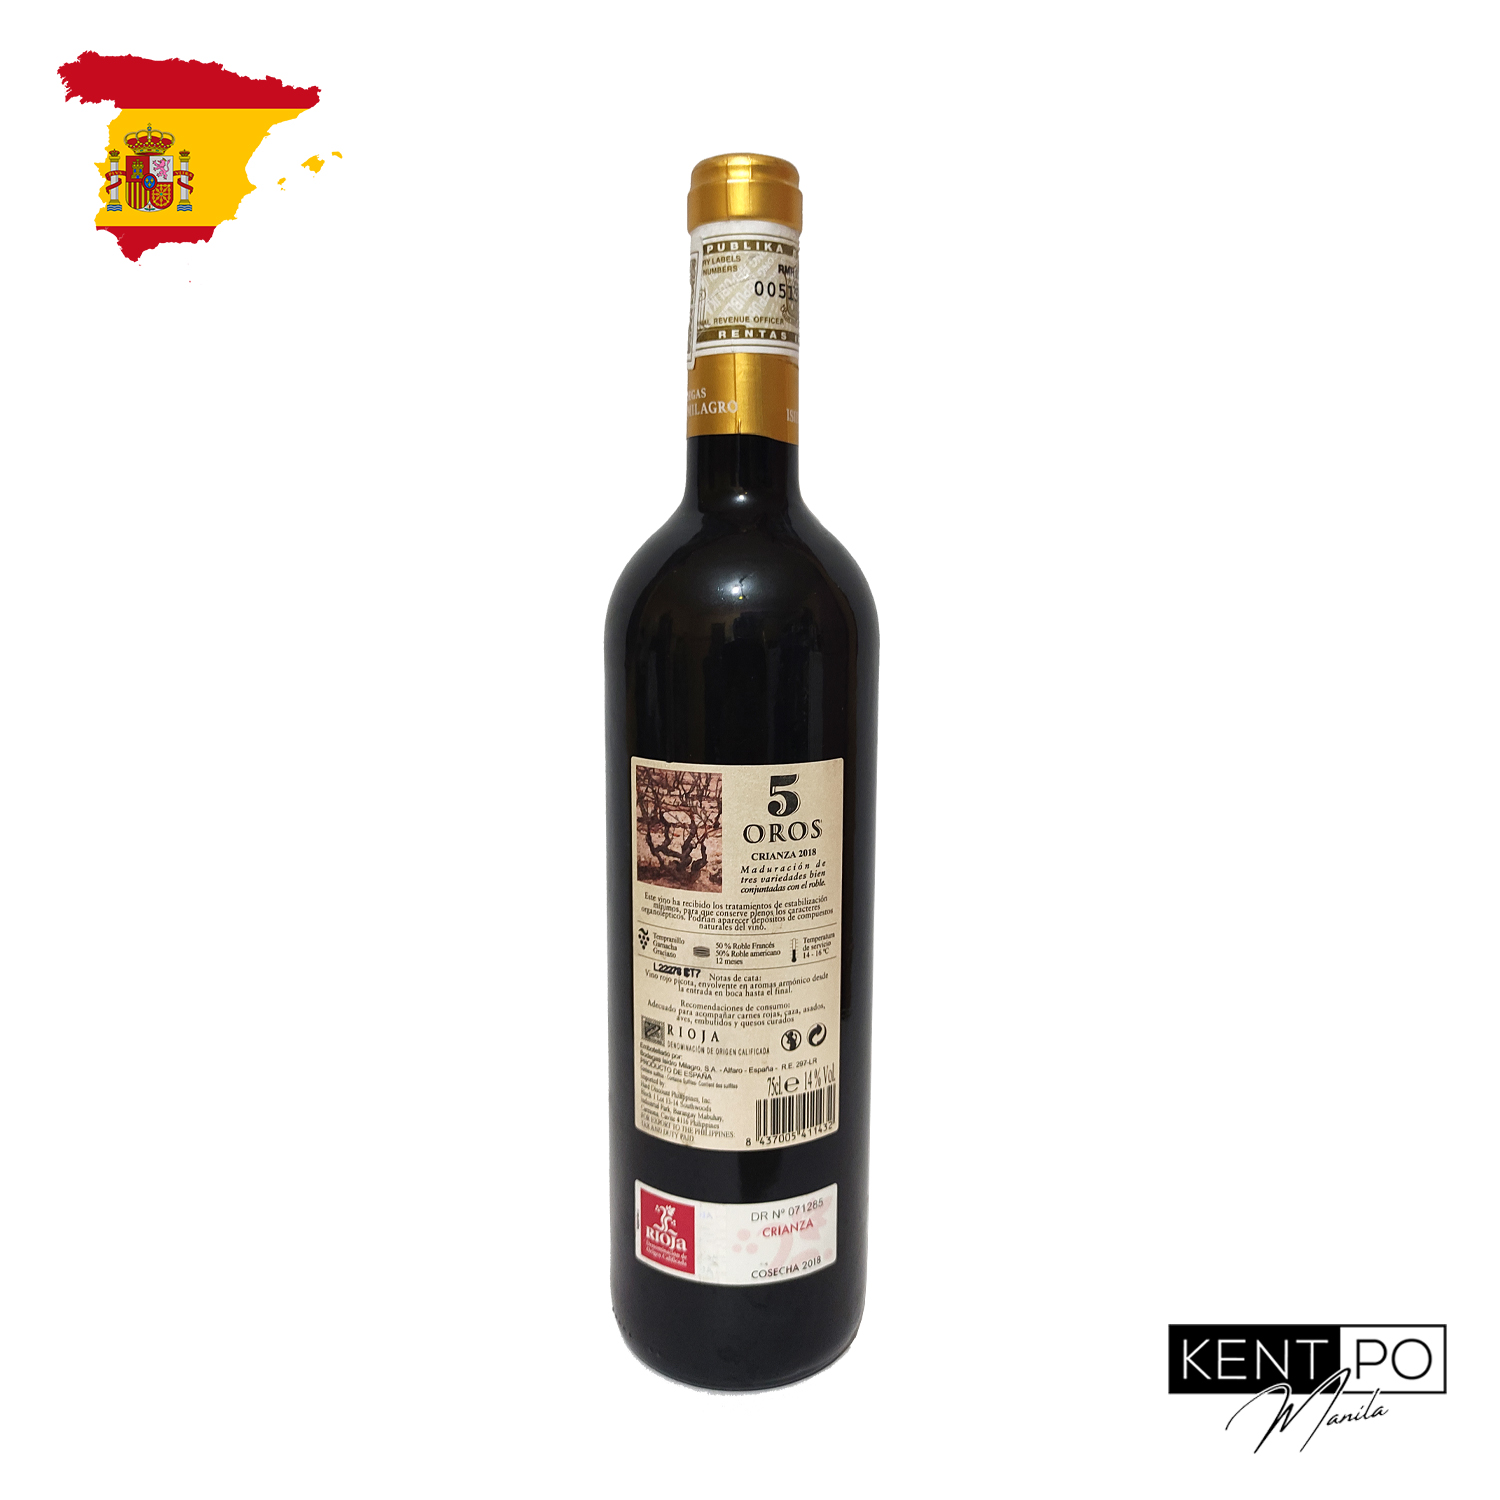 Lazada SPAIN OROS CRIANZA PRODUCT ISIDRO BODEGAS MILAGRO | OF 75cl RED 2018 IMPORTED WINE 5 PH